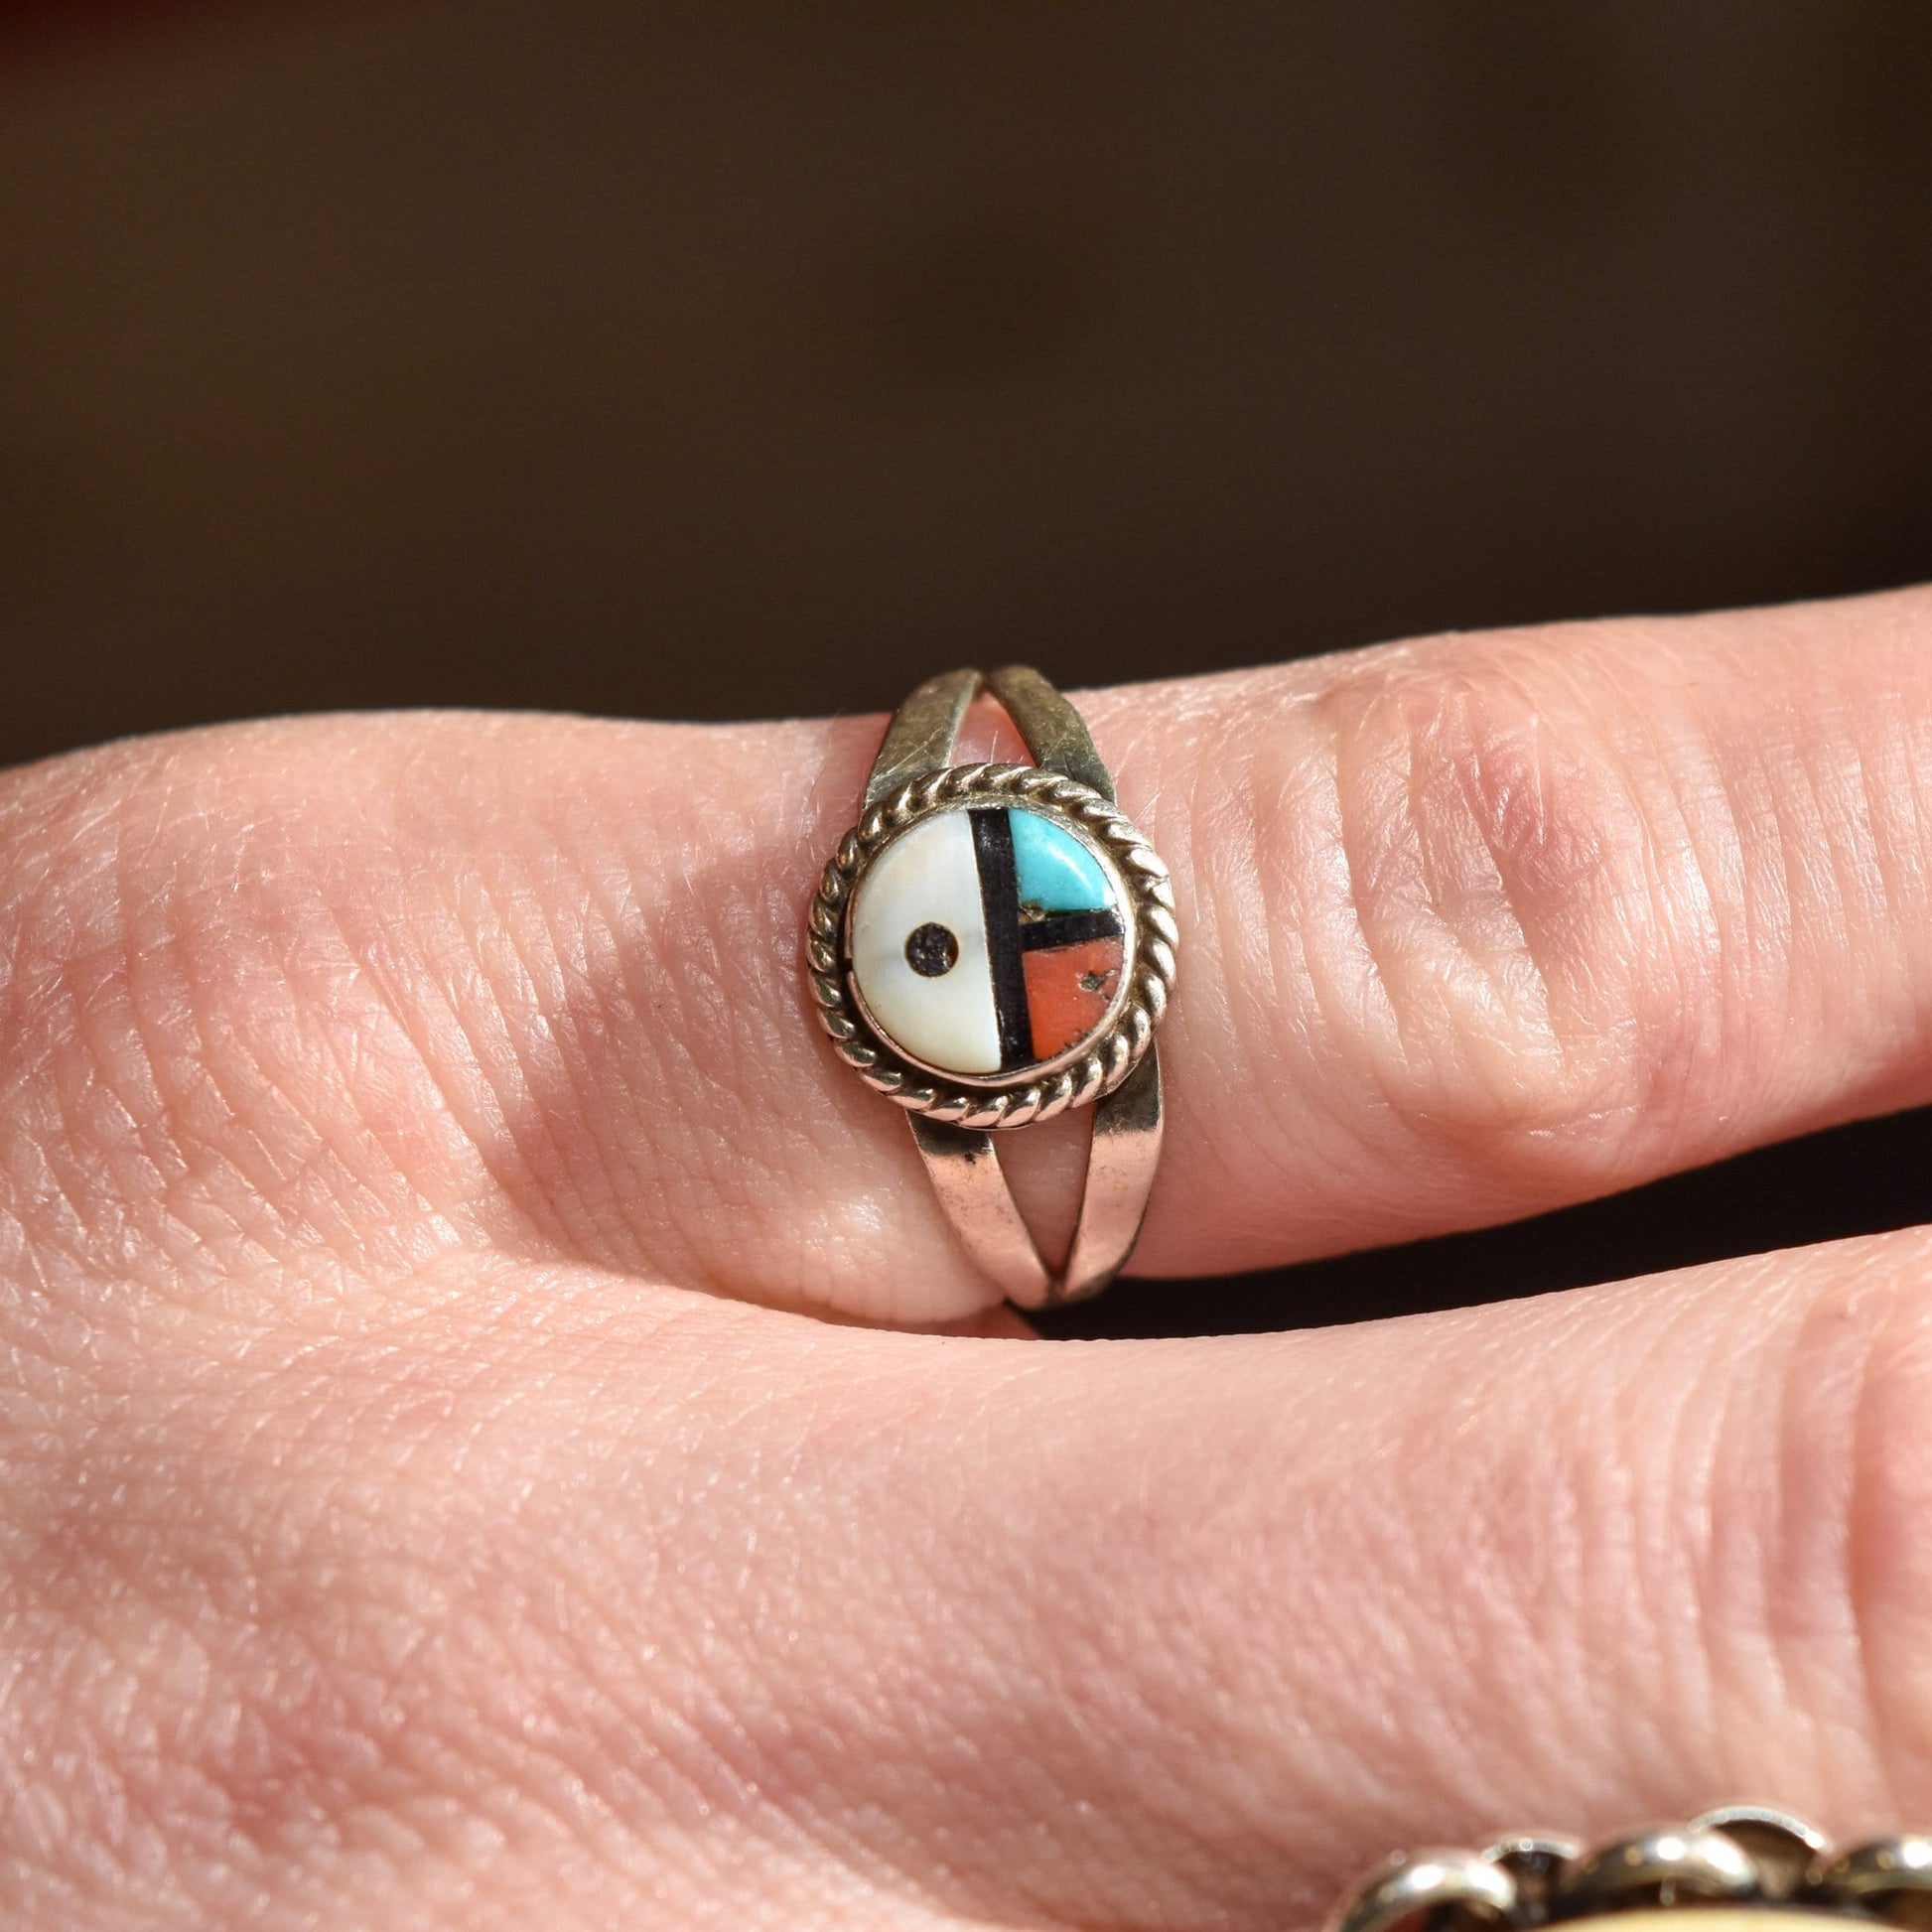 Sterling silver Little Zuni sun face ring with inlaid multicolor stones on finger, Native American jewelry, size 5.25 US, close-up view for stacking ring.